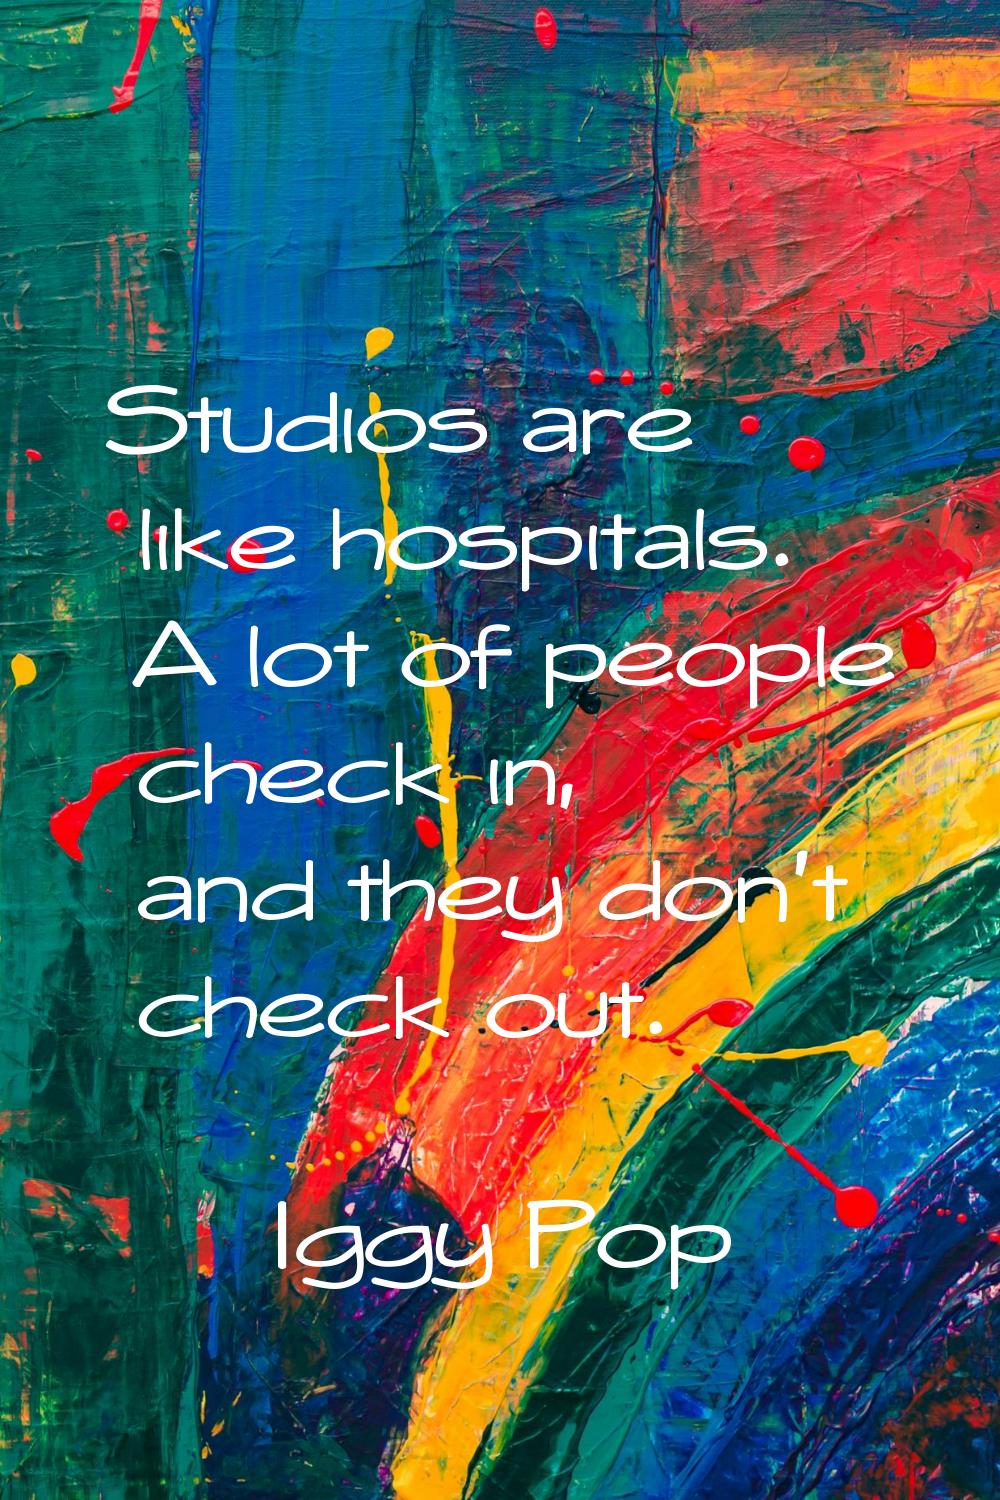 Studios are like hospitals. A lot of people check in, and they don't check out.